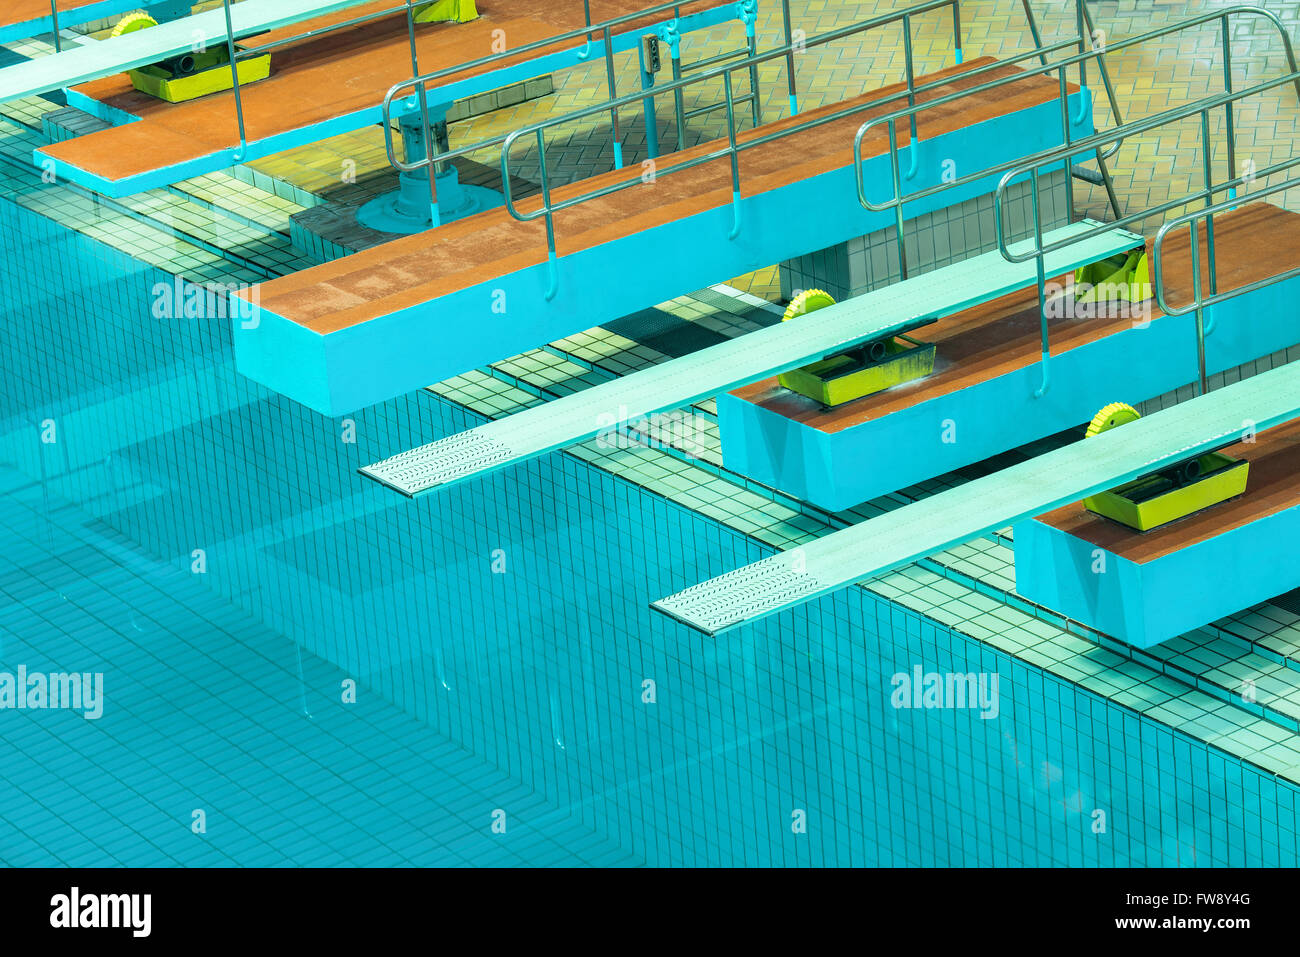 Several diving boards in the swimimg pool. Stock Photo